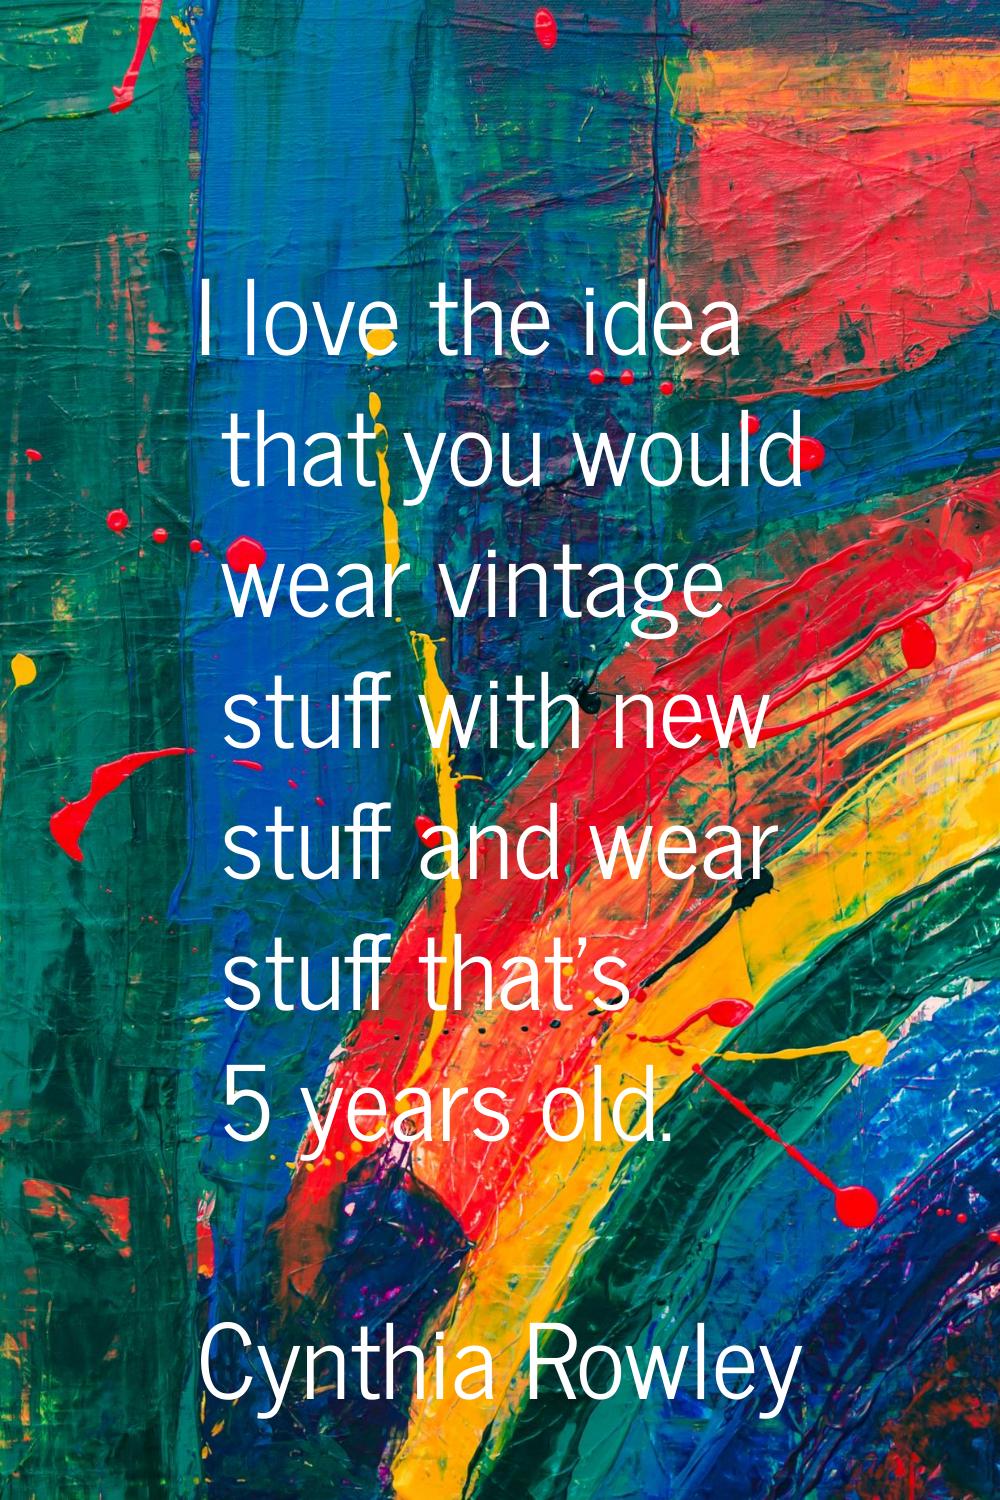 I love the idea that you would wear vintage stuff with new stuff and wear stuff that's 5 years old.